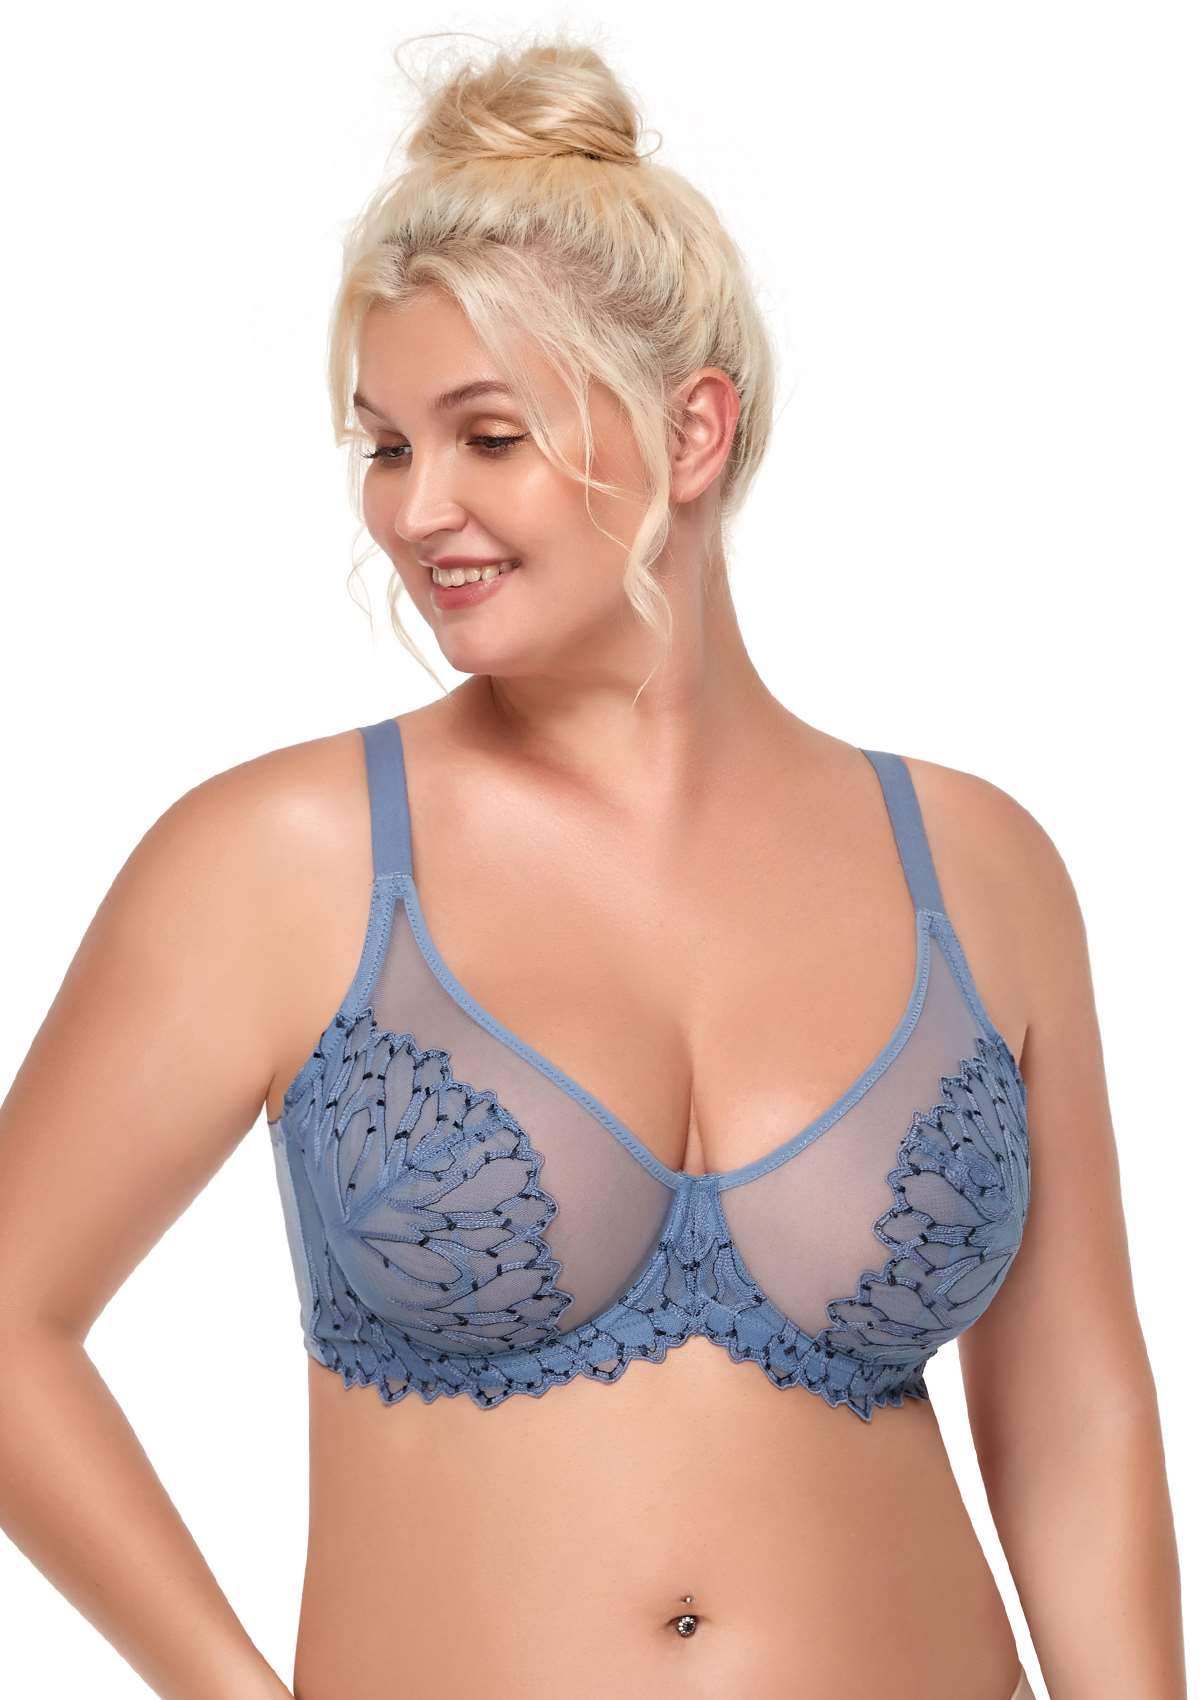 HSIA Chrysanthemum Plus Size Lace Bra: Back Support Bra For Posture - Blue / 34 / D